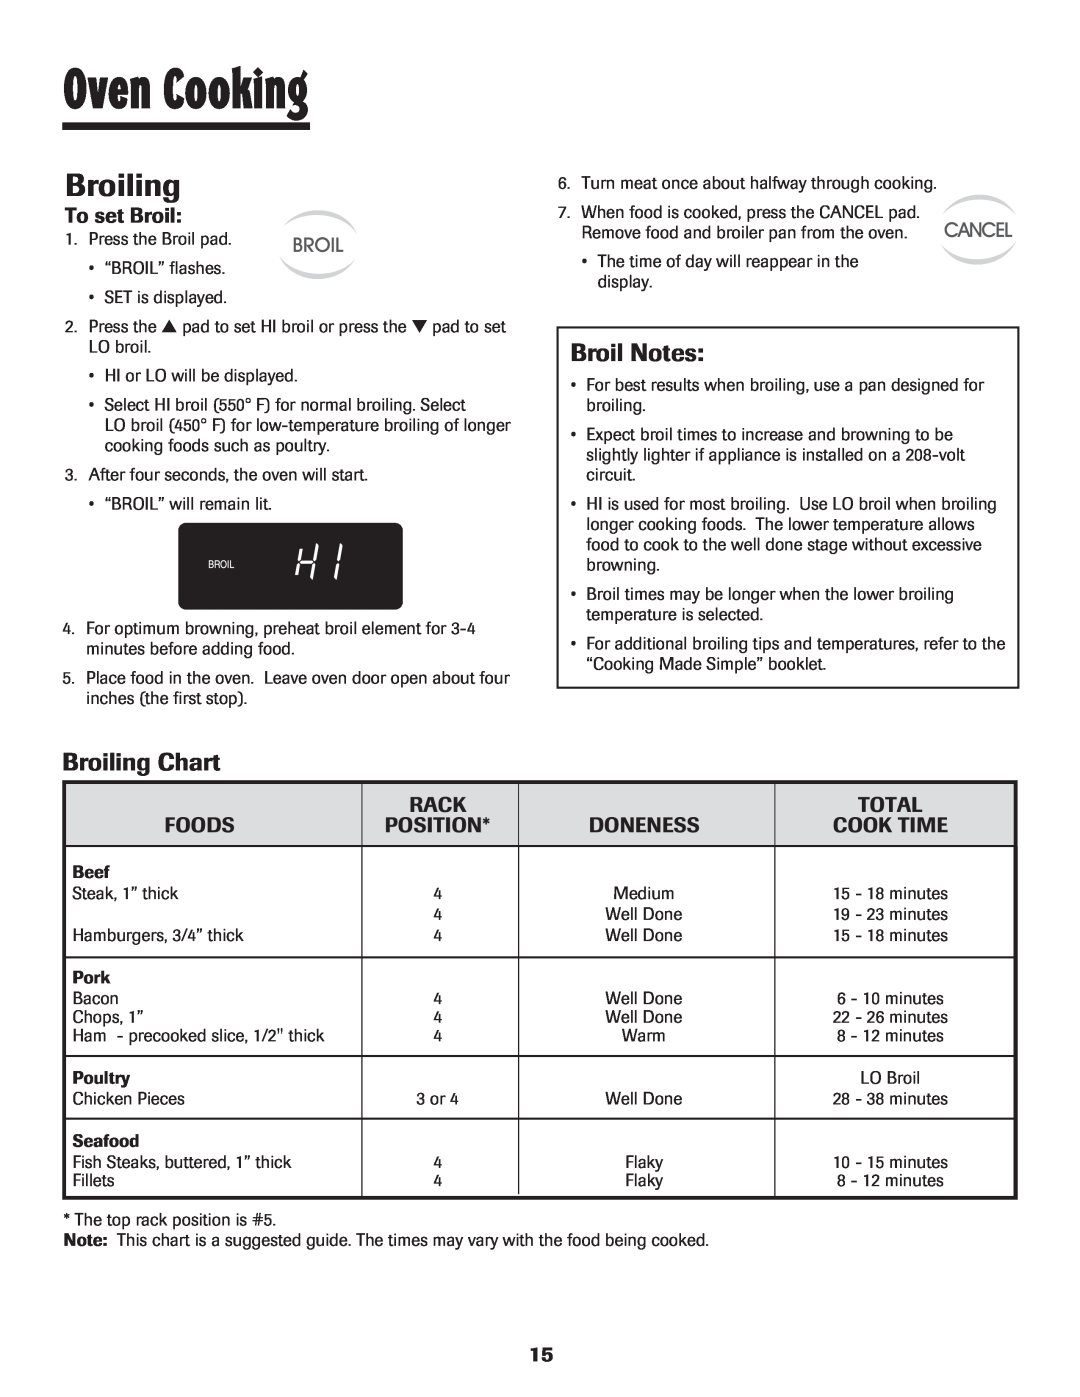 Maytag warranty Broil Notes, Broiling Chart, To set Broil, Rack, Total, Foods, Position, Cook Time, Oven Cooking 